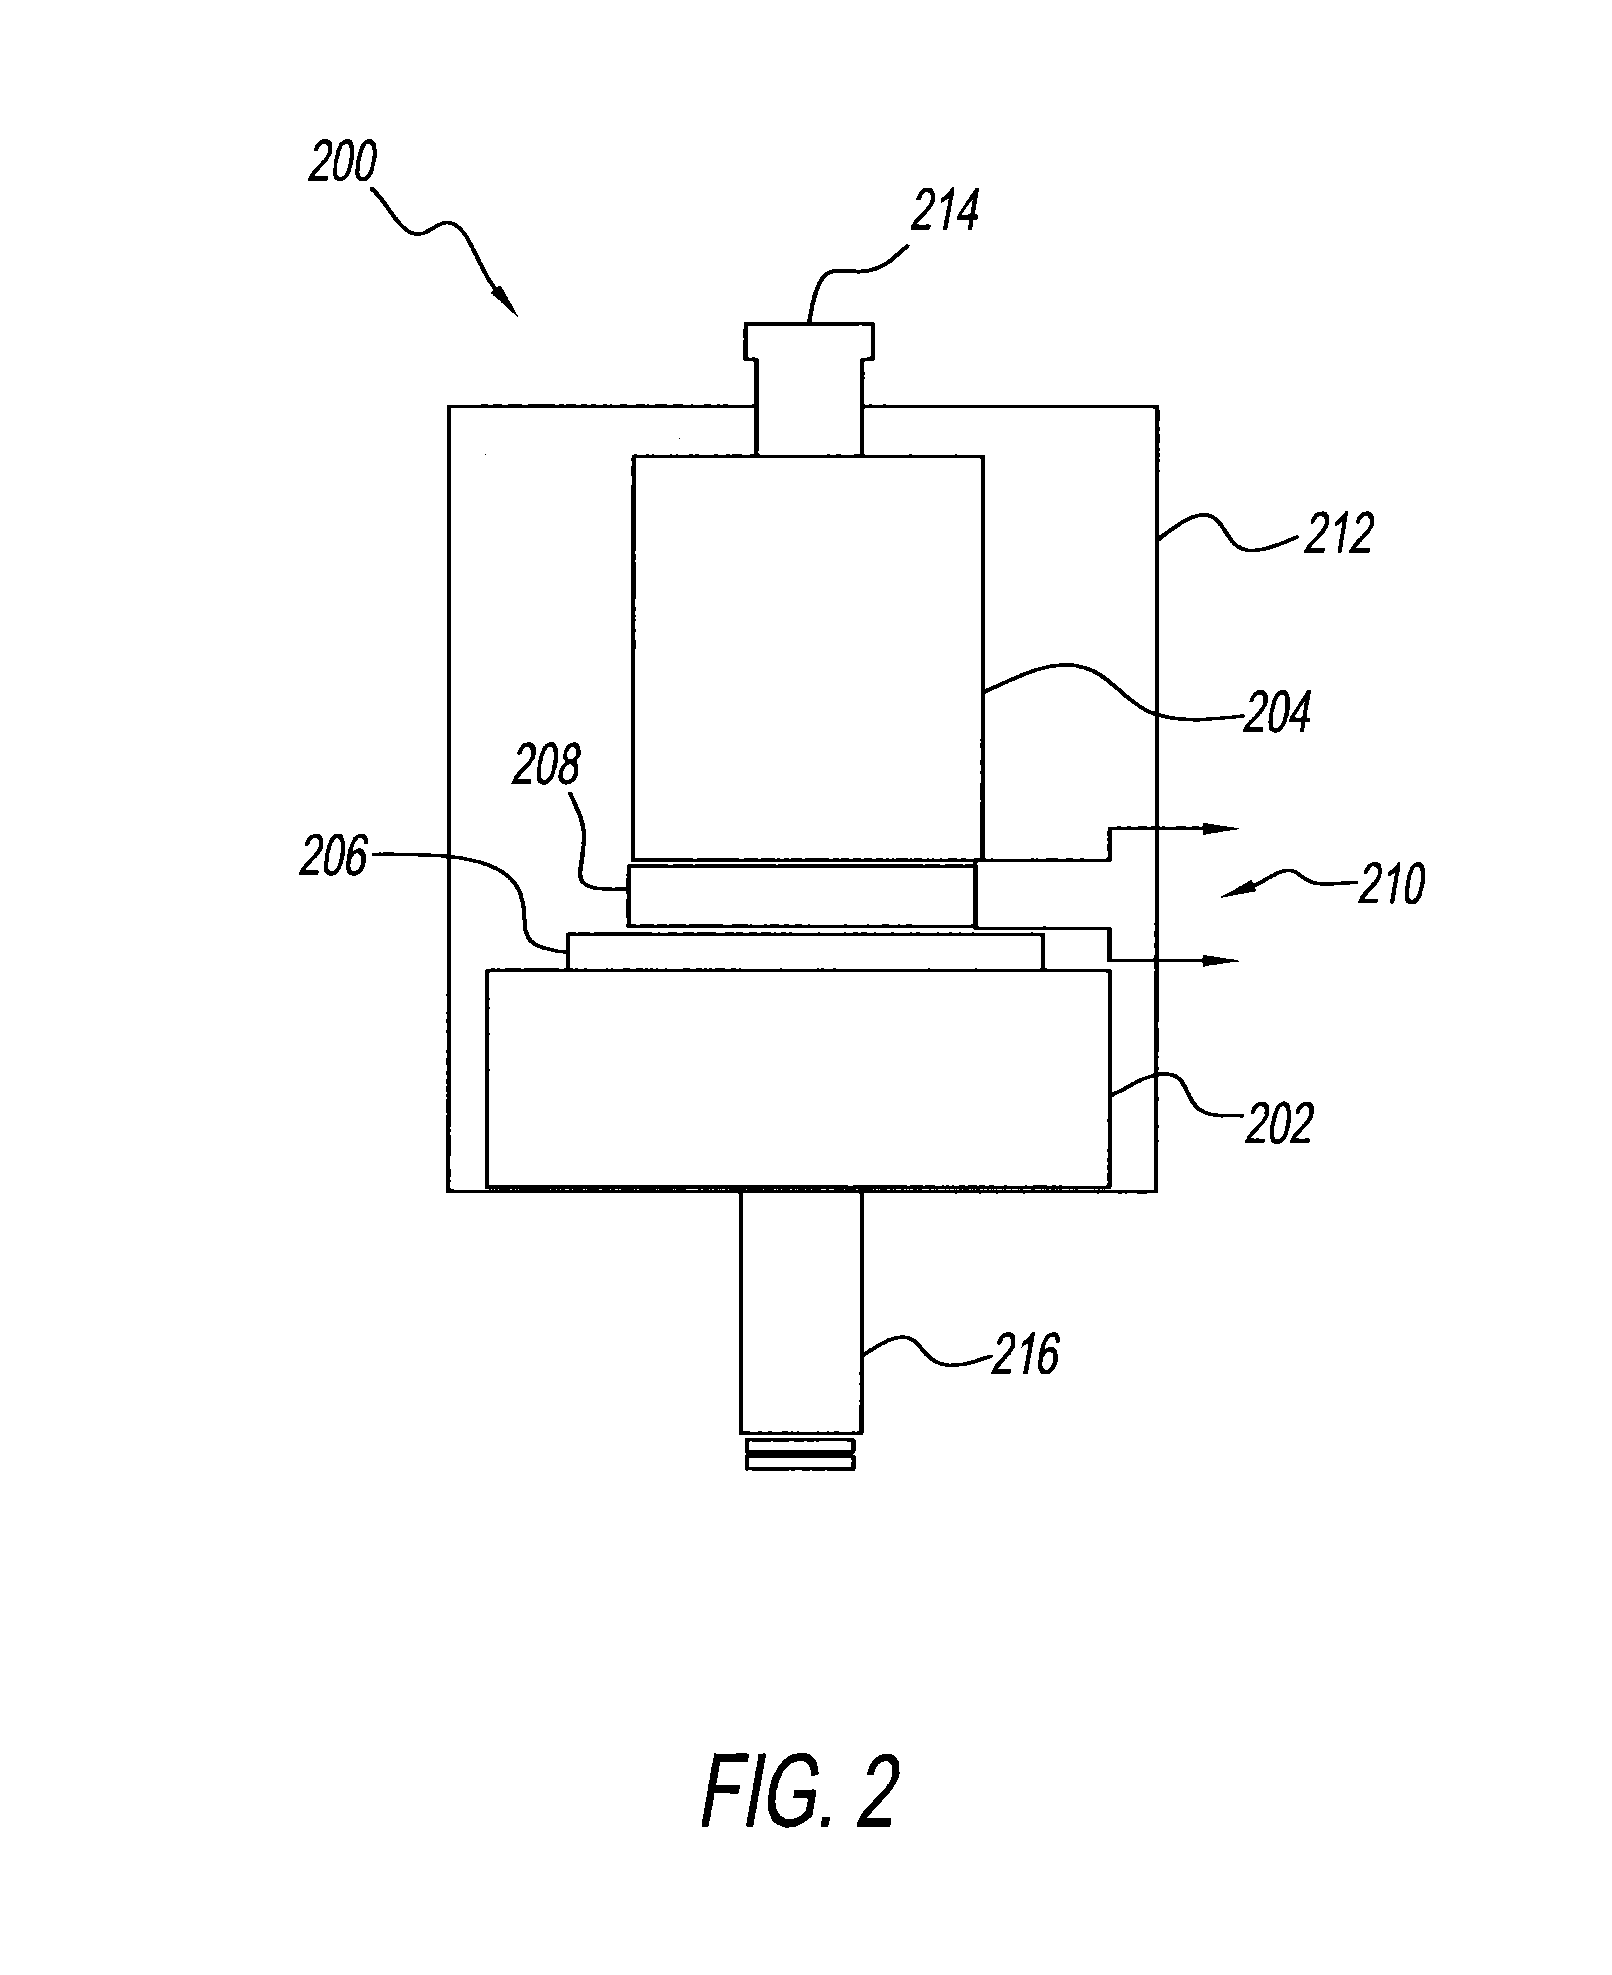 Piezoelectric glass ceramic compositions and piezoelectric devices made therefrom